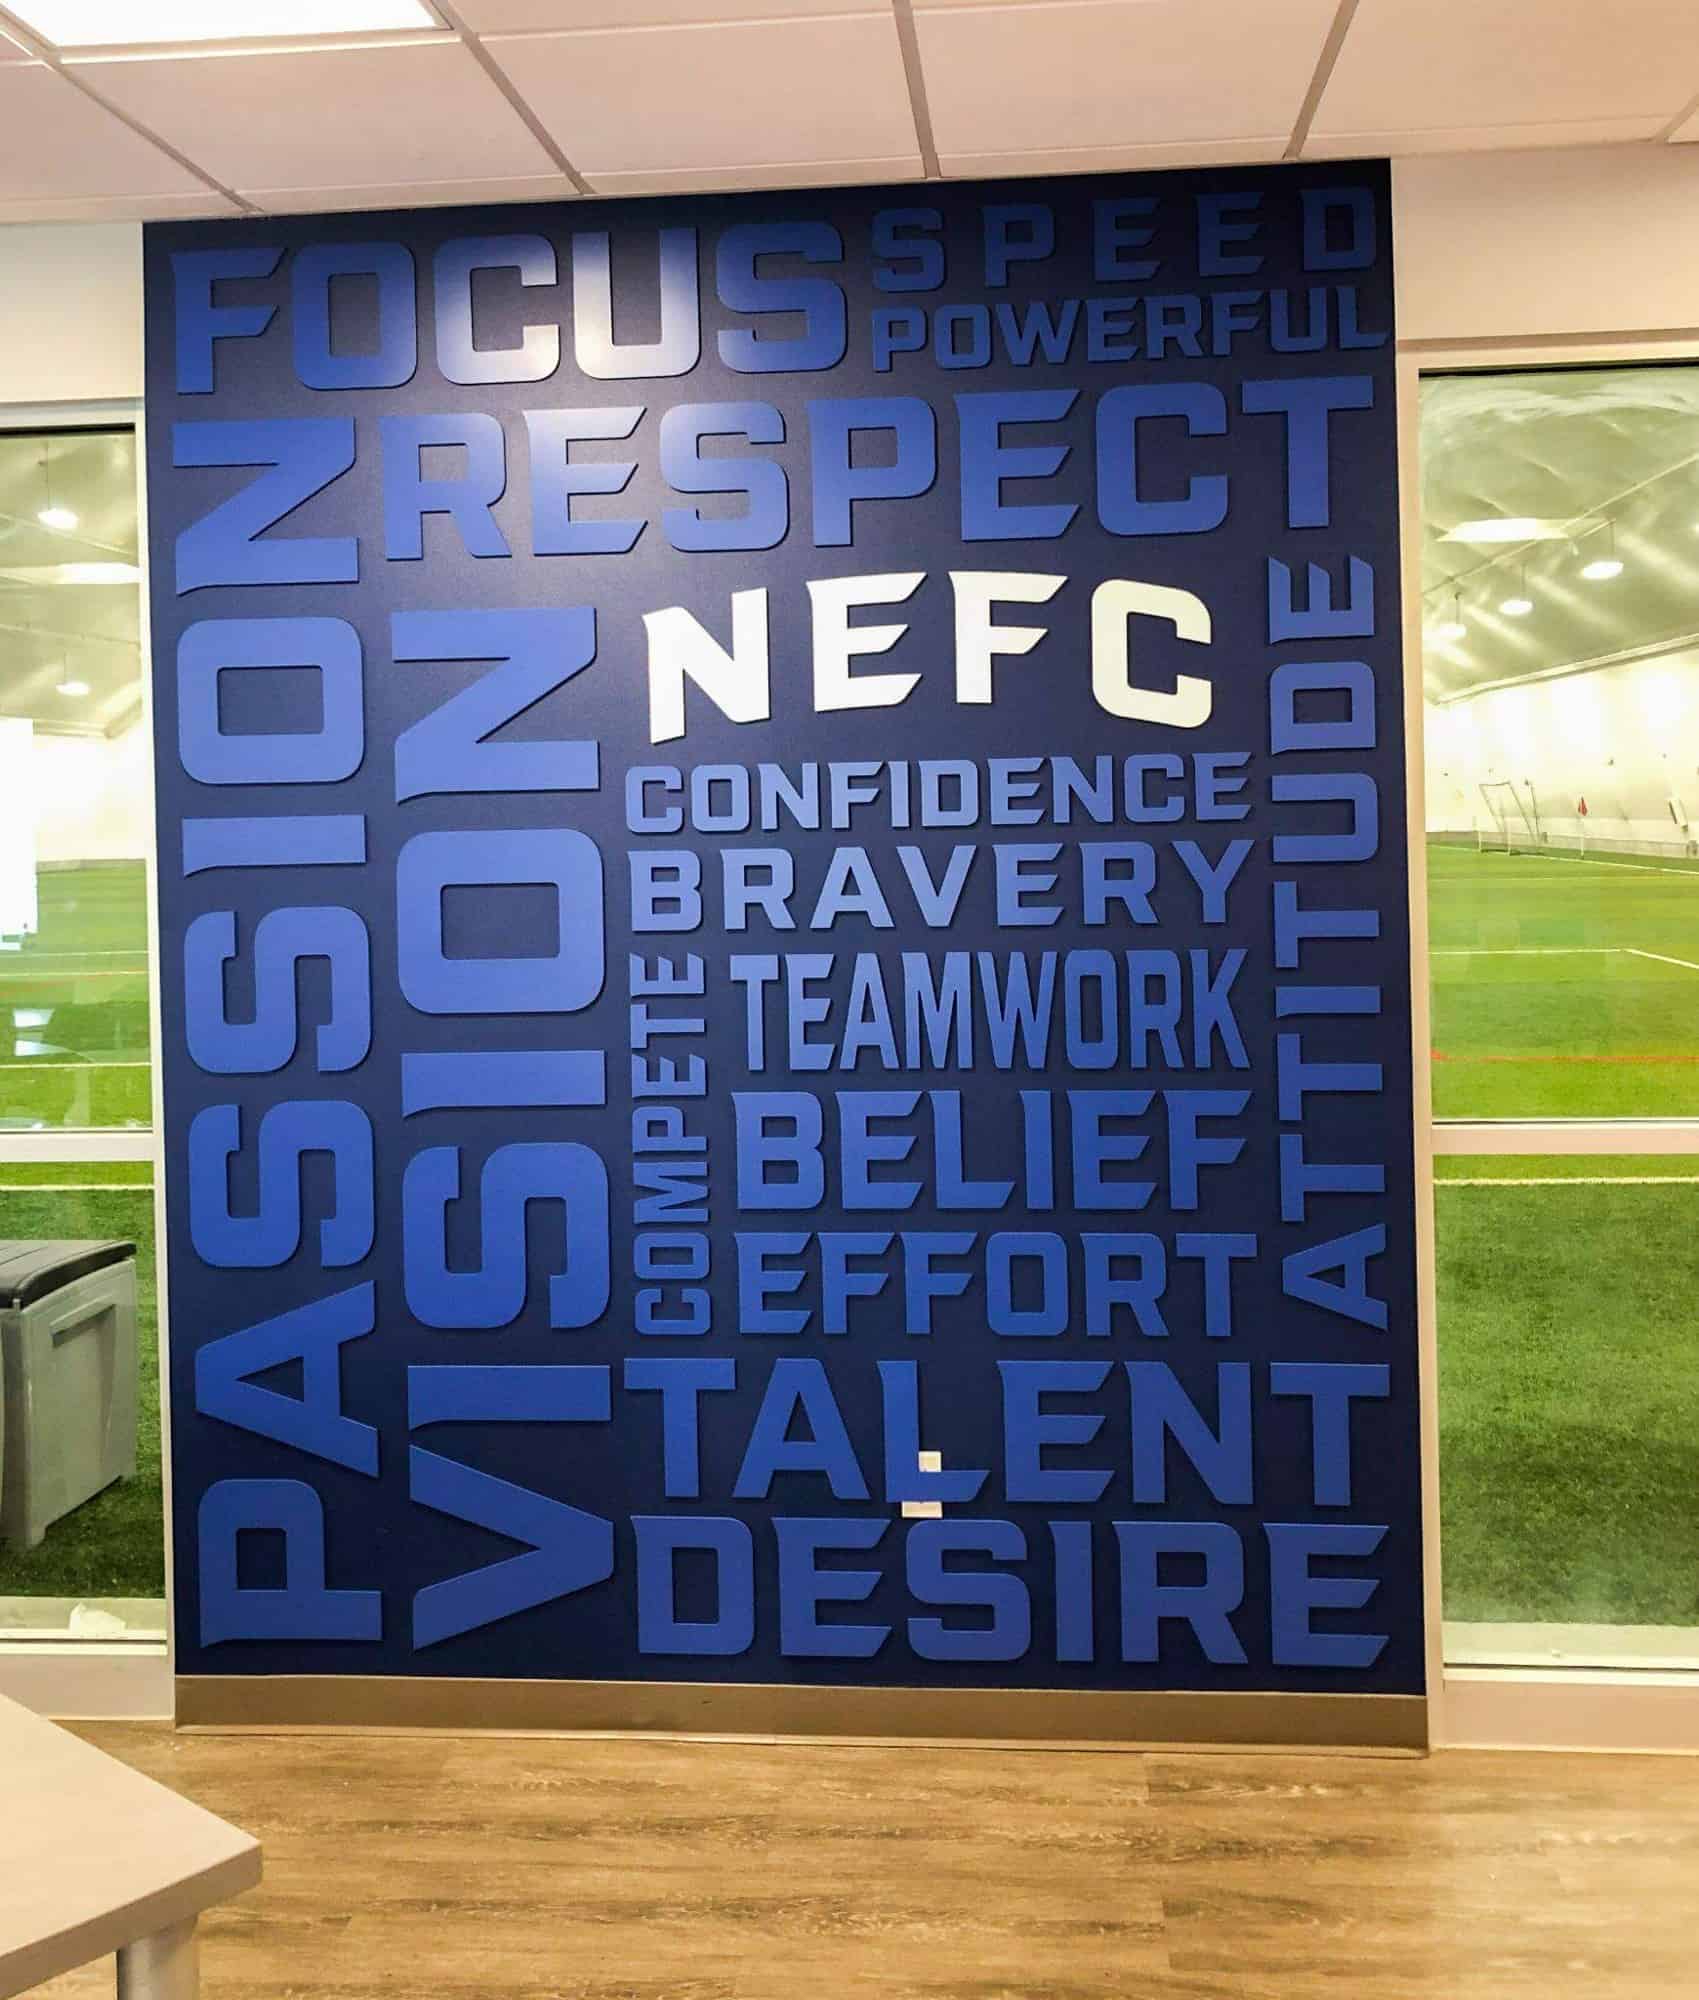 NEFC’s office has a unique word branding wall that draws the eye.